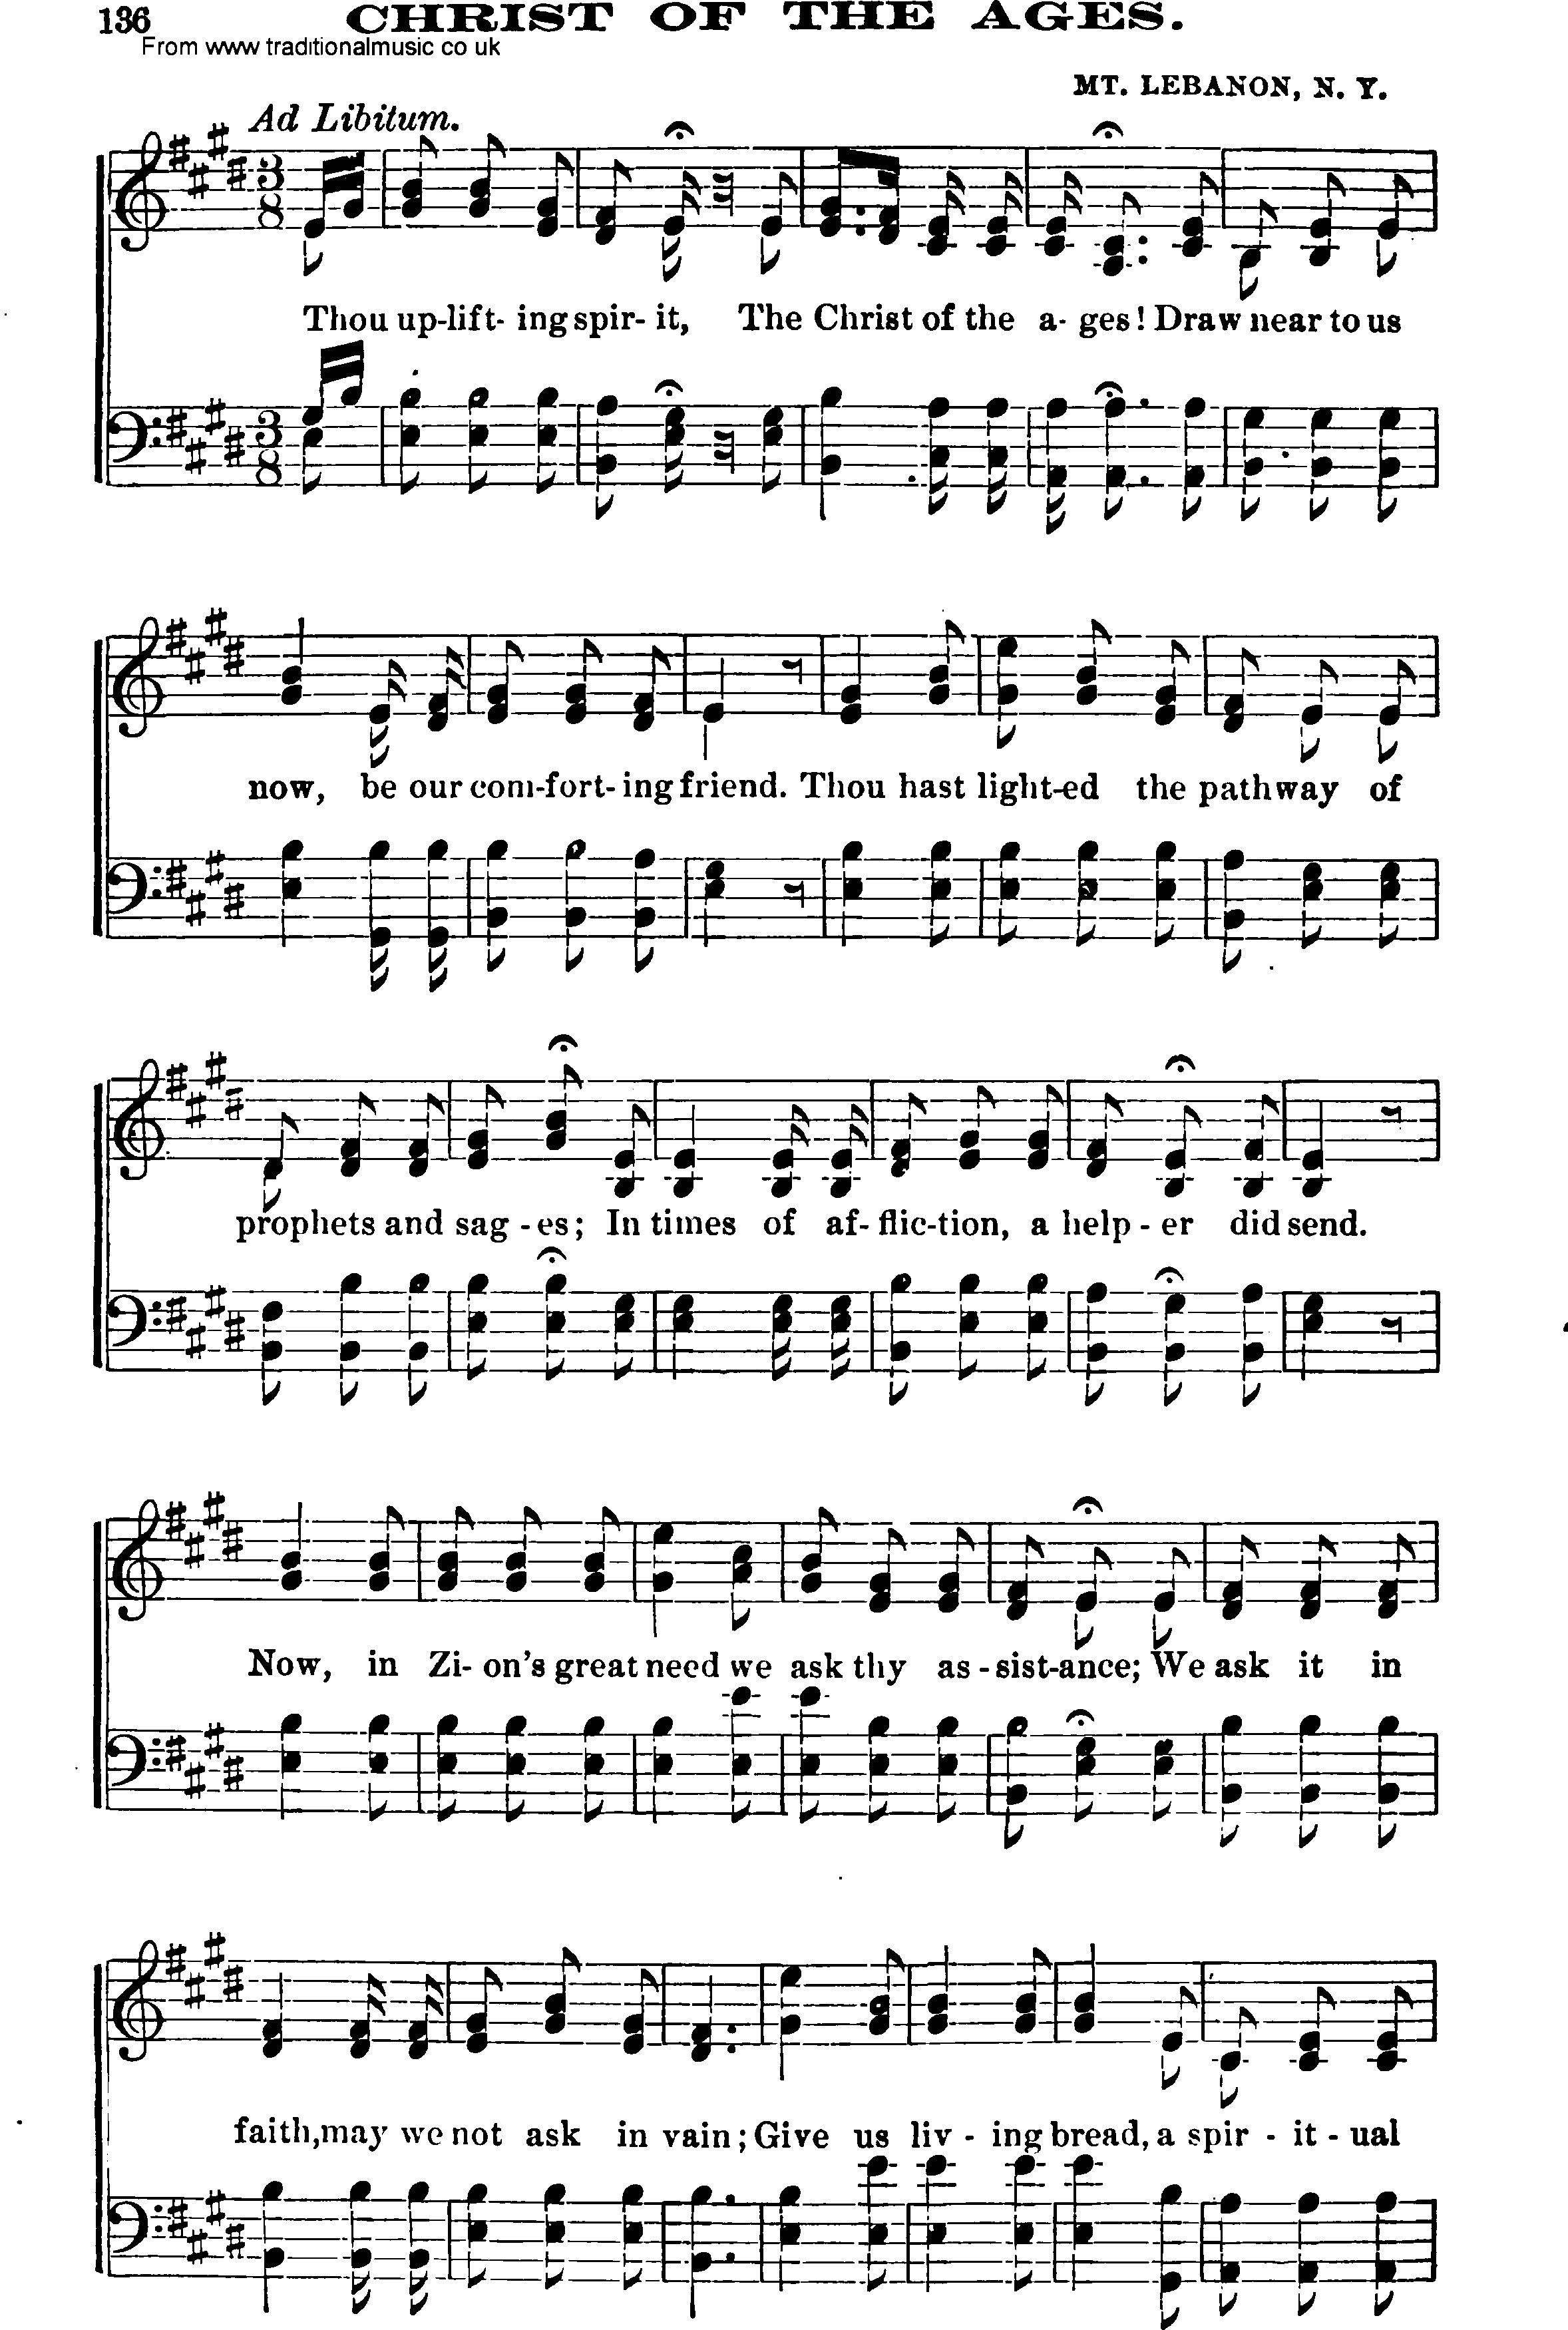 Shaker Music collection, Hymn: Christ Of The Ages, sheetmusic and PDF